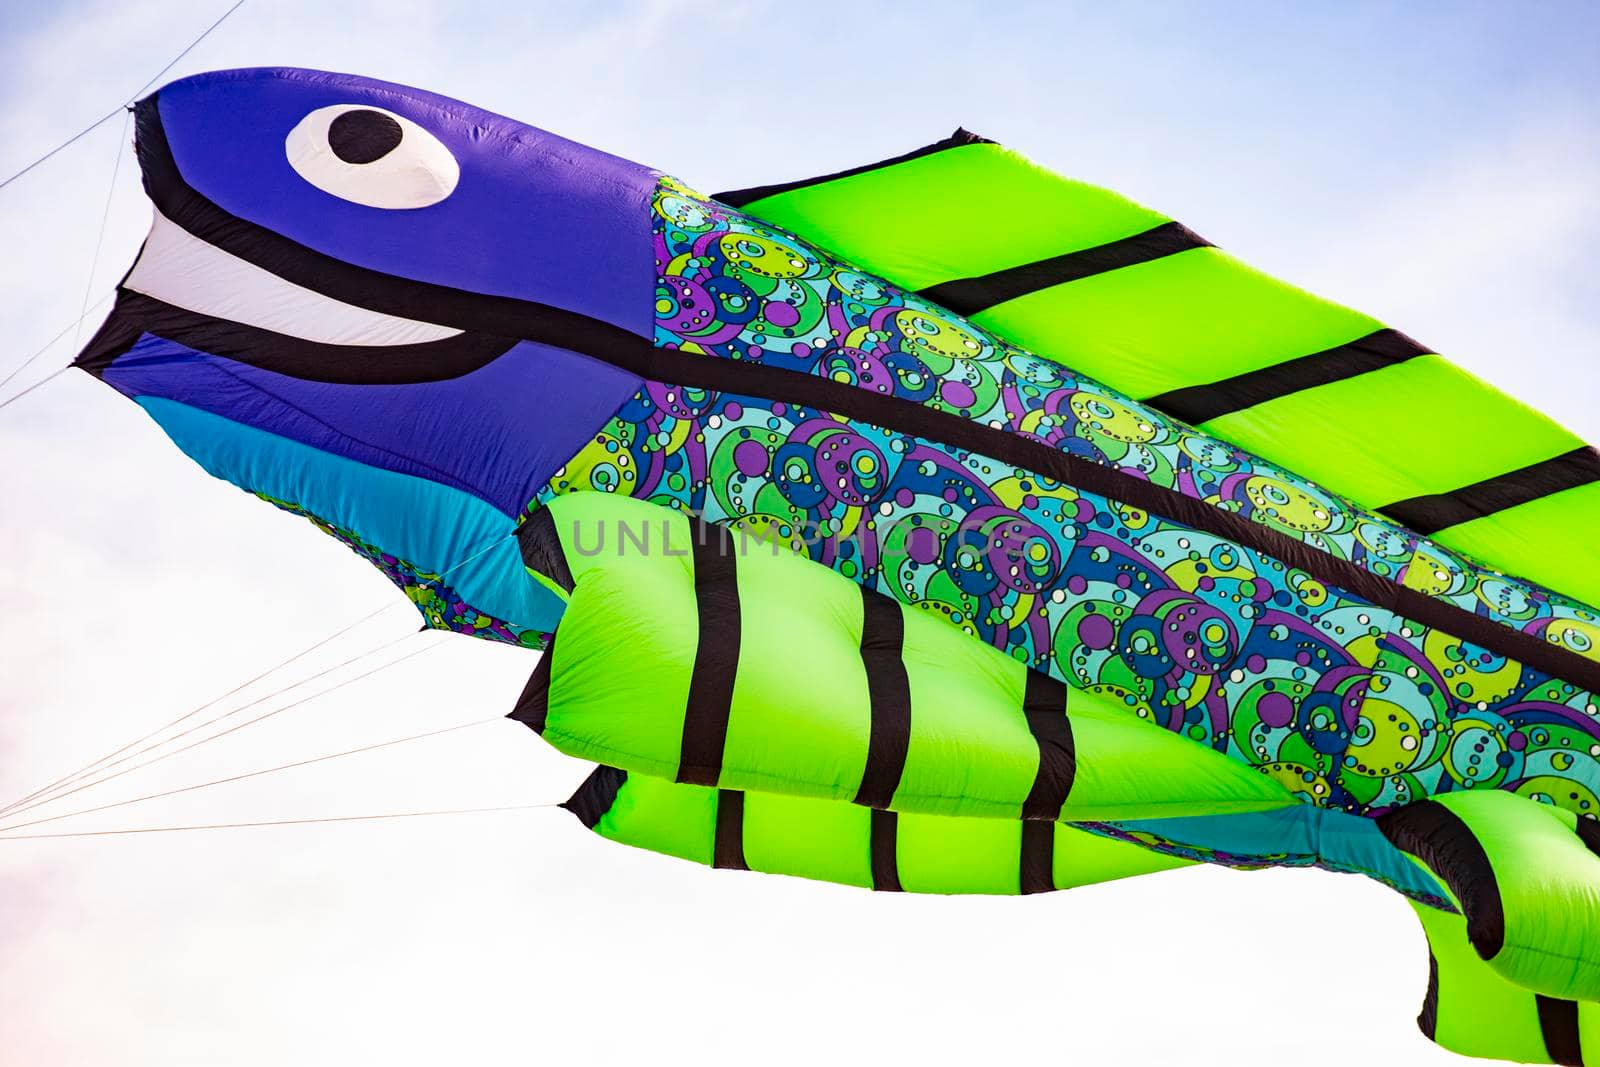 Flying kite with Fish-shaped colored green and purple